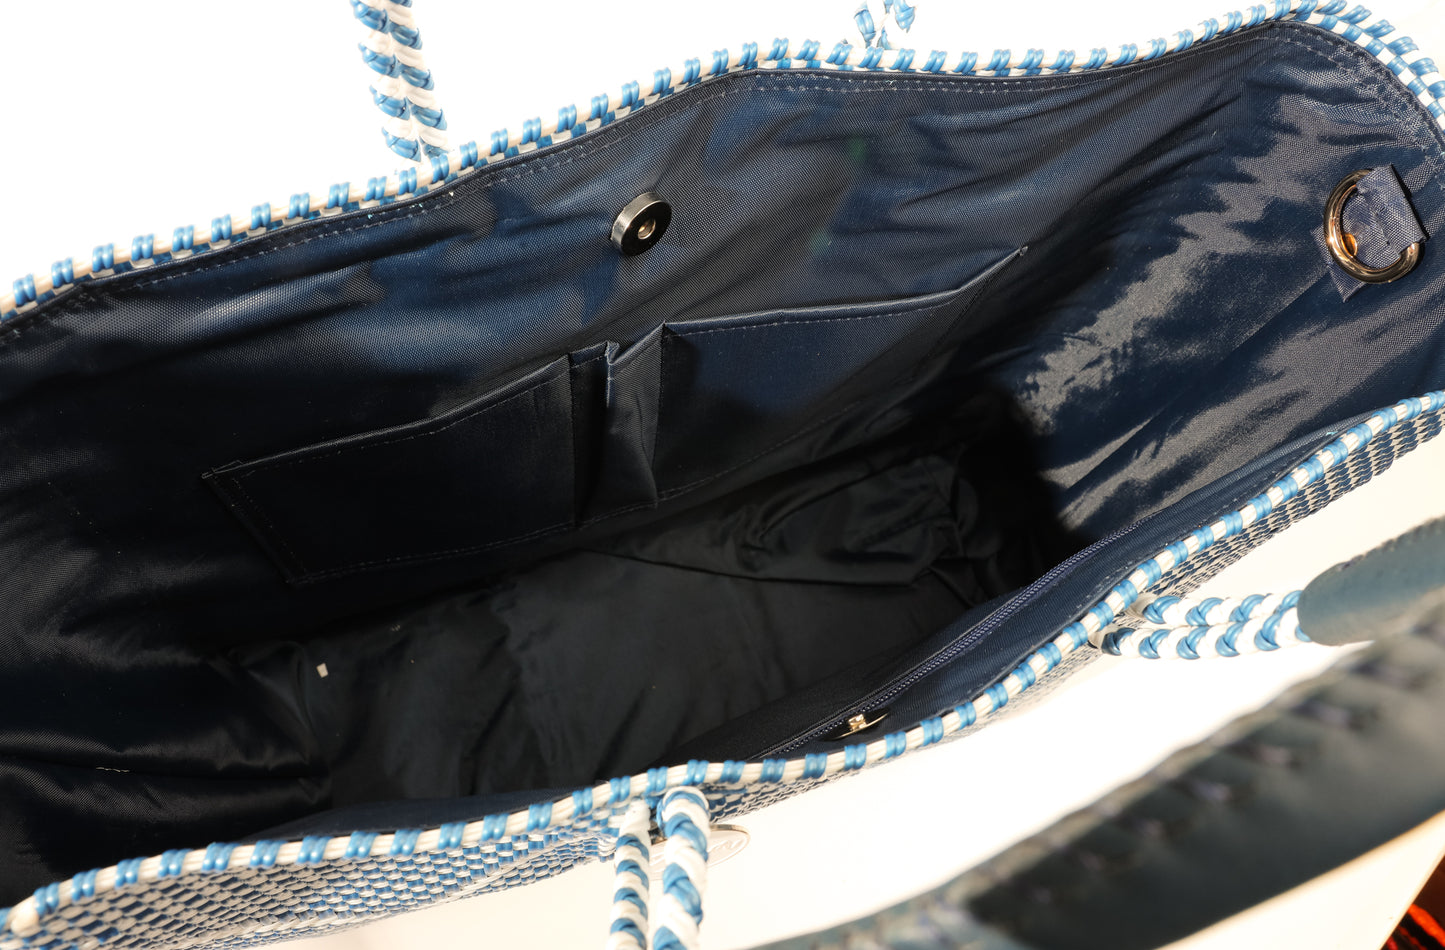 Inside navy blue lining featuring 2 pockets and magnetic closure of blue and white chevron woven bucket bag made from recycled plastics featuring navy blue leather handles and tassel detail